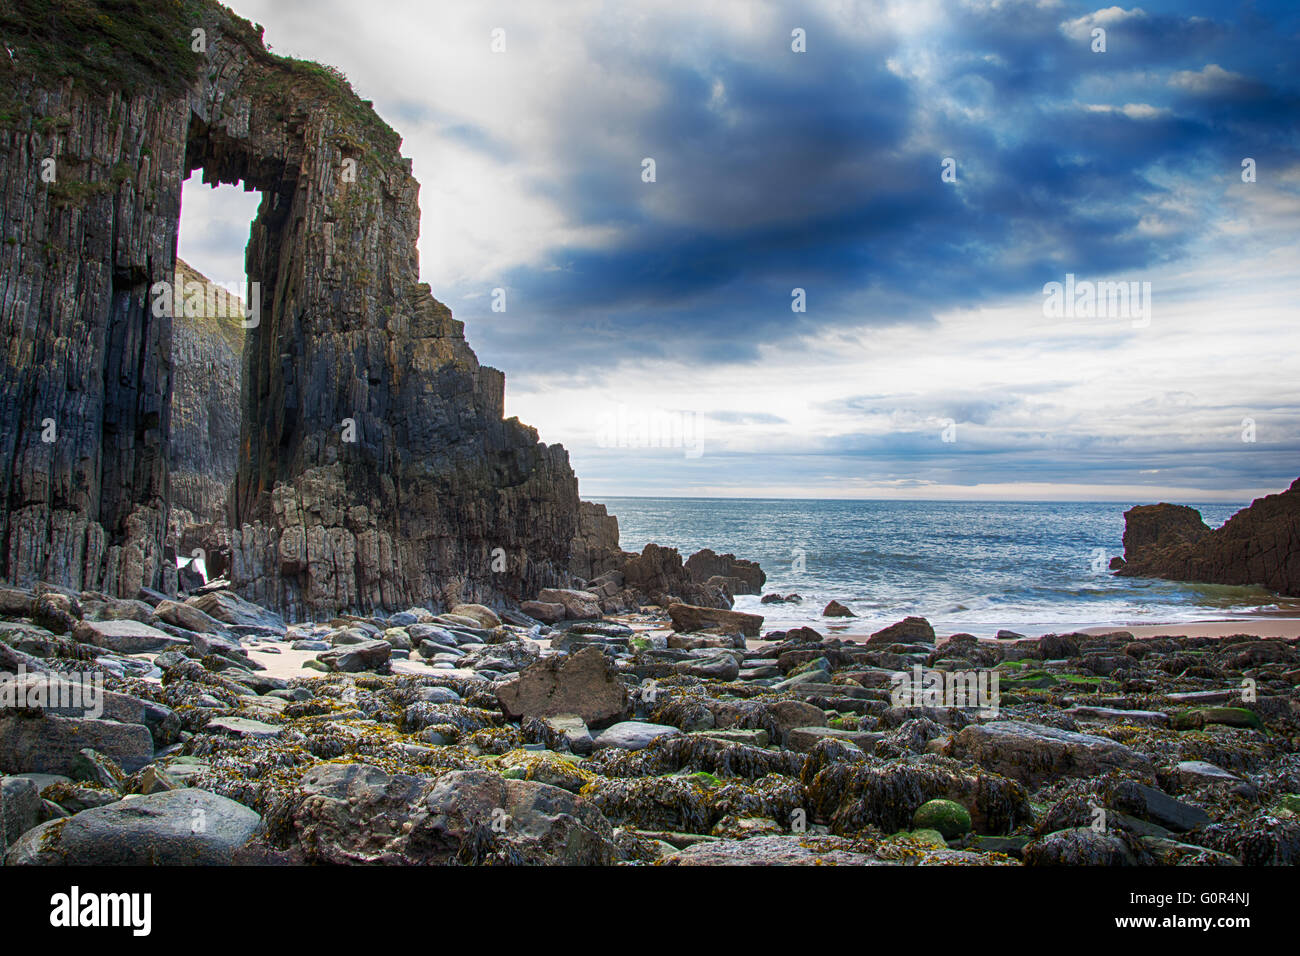 Church Doors rock formation in Skrinkle Haven cove with surf washing ...